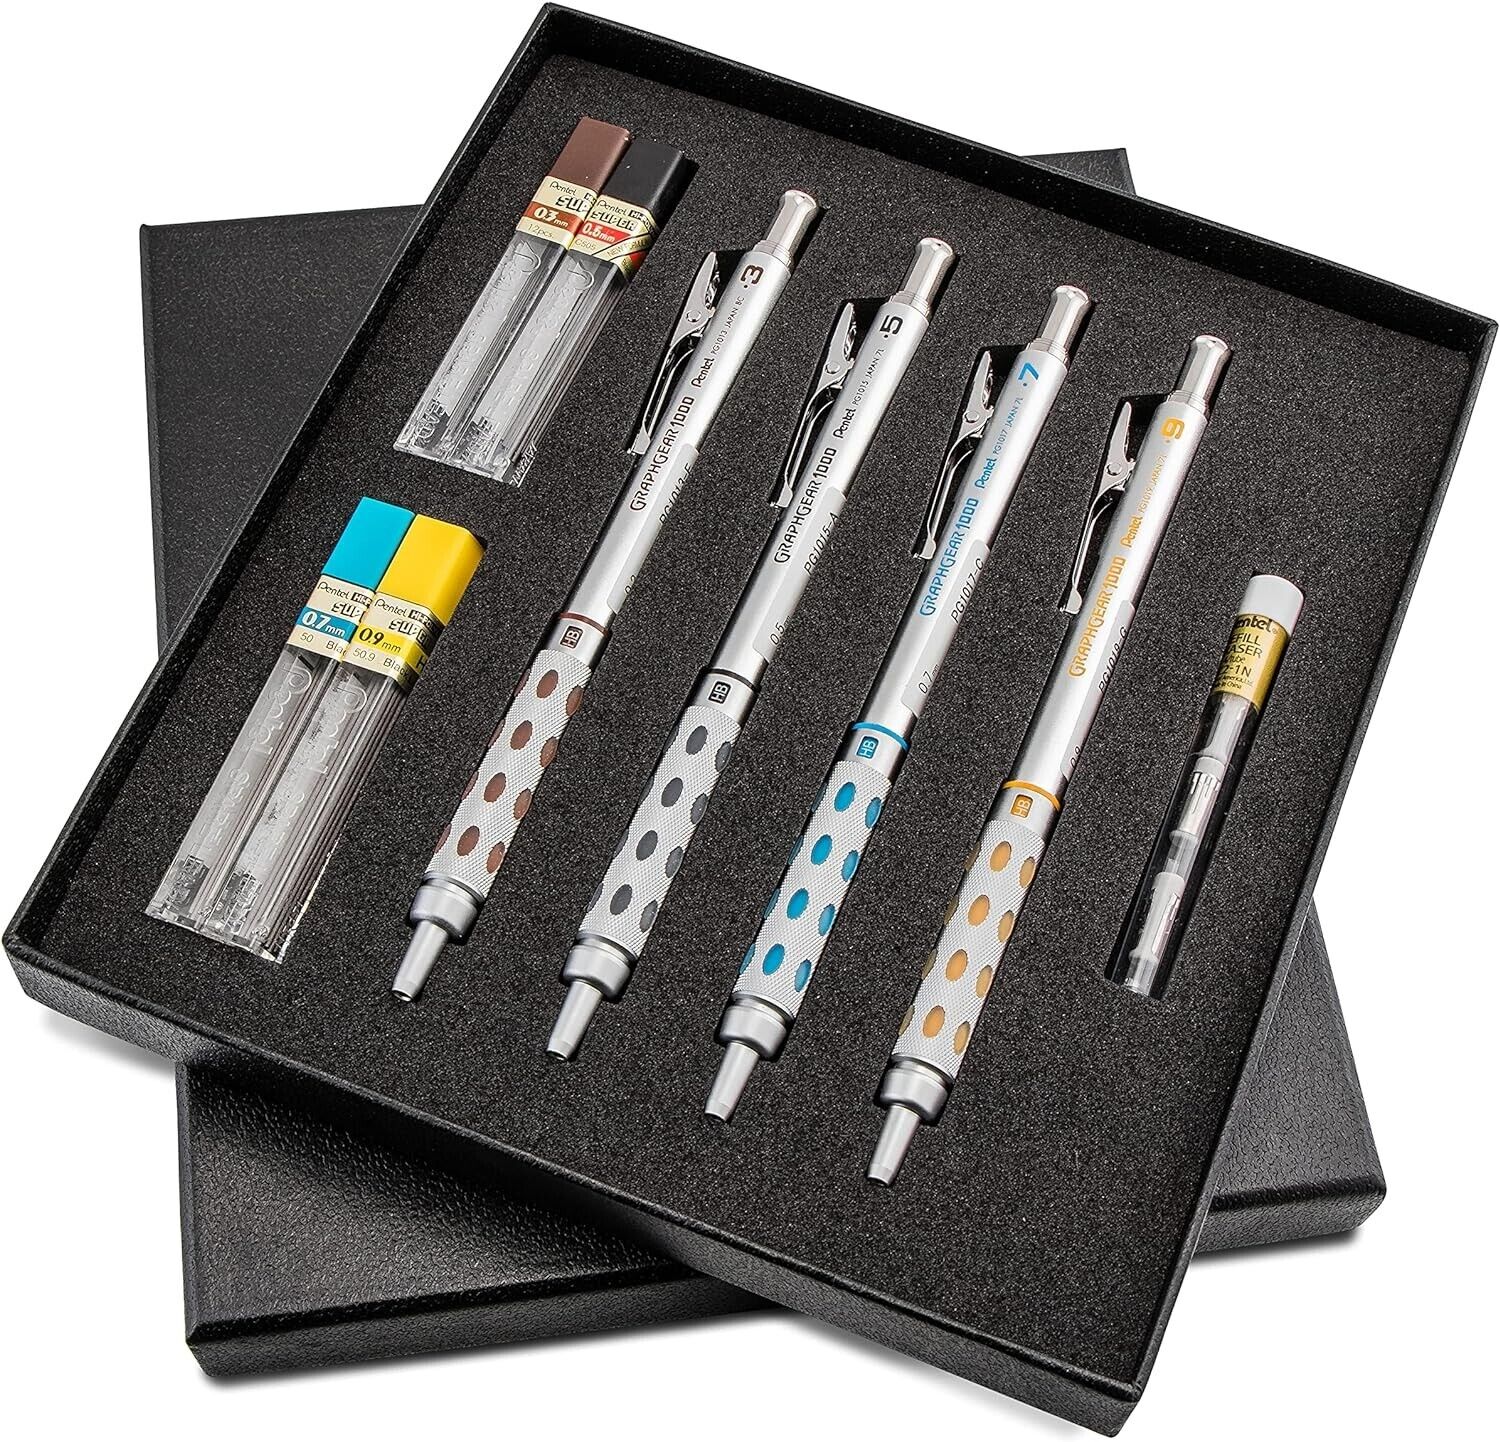 Pentel GRAPHGEAR 1000 Premium Pencils Gift Set with Refill Leads & Erasers